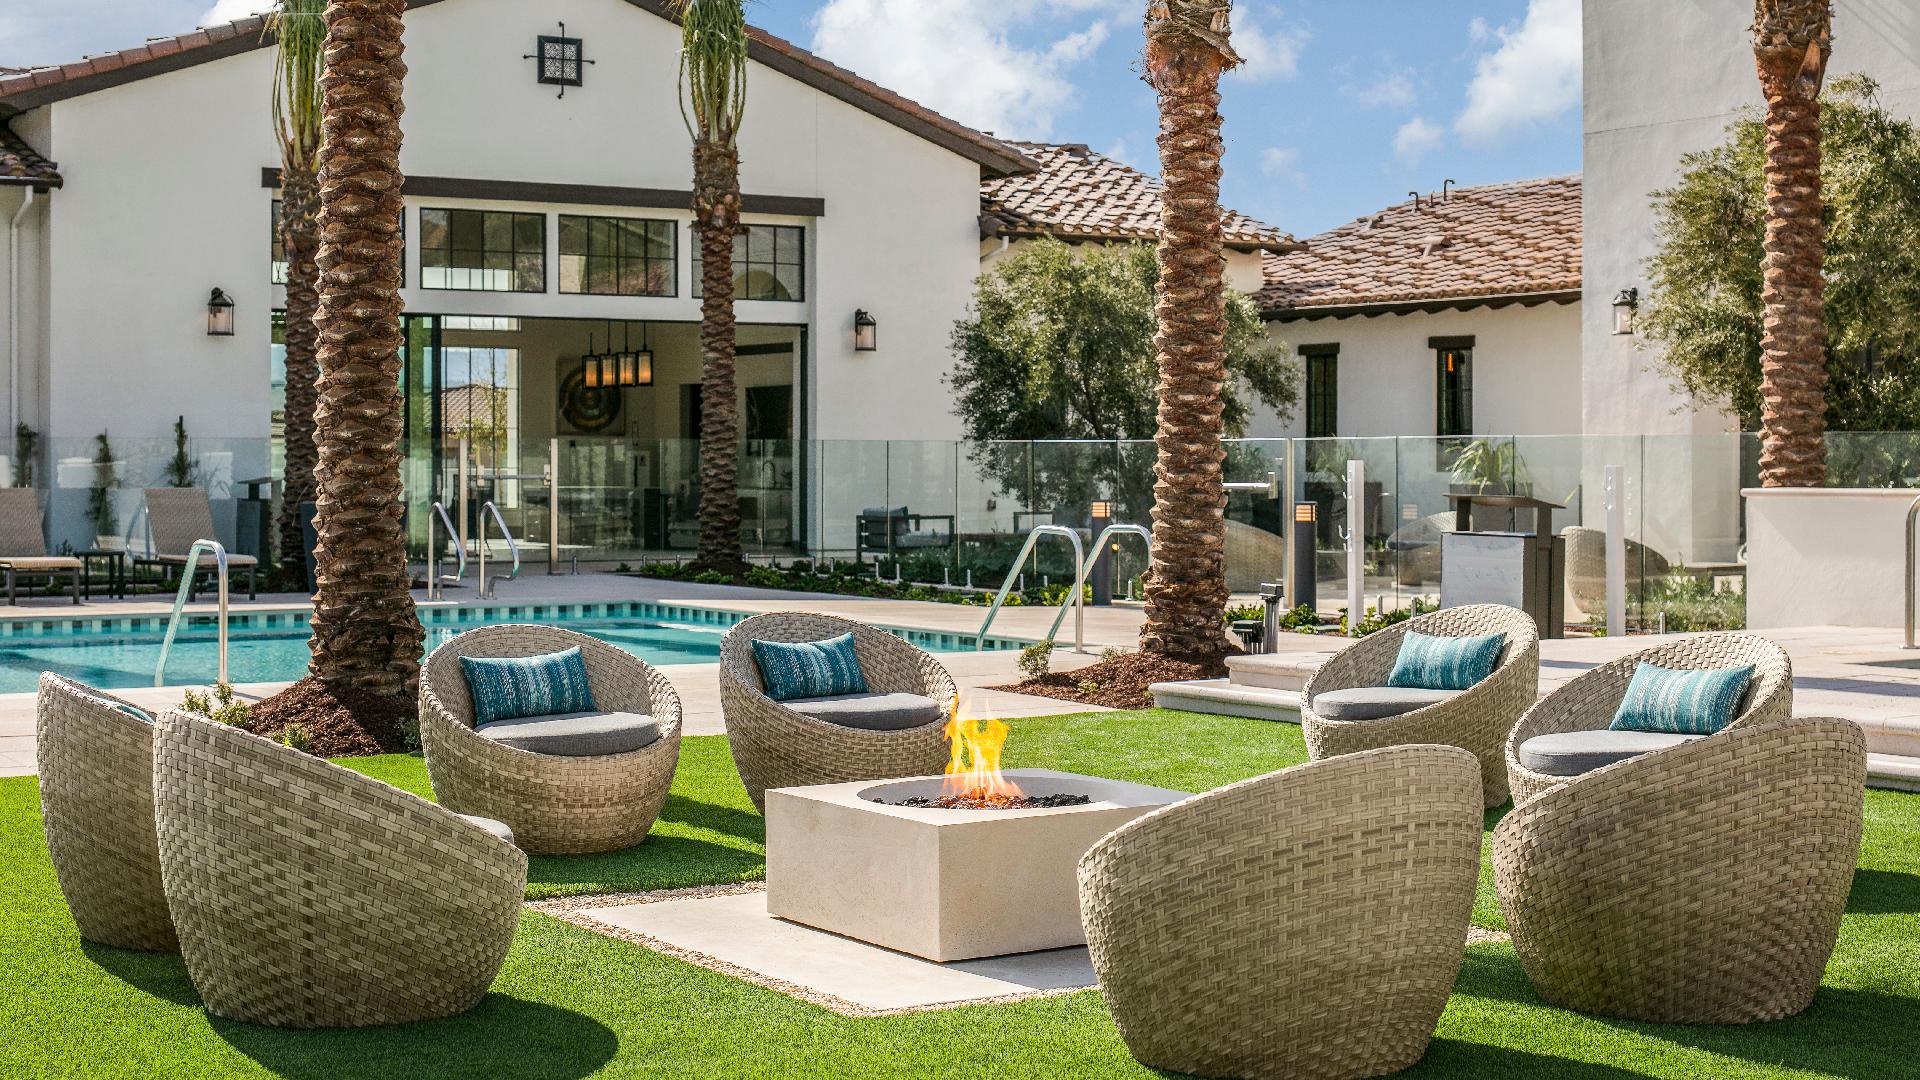 Clubhouse outdoor lounge area with fire pit